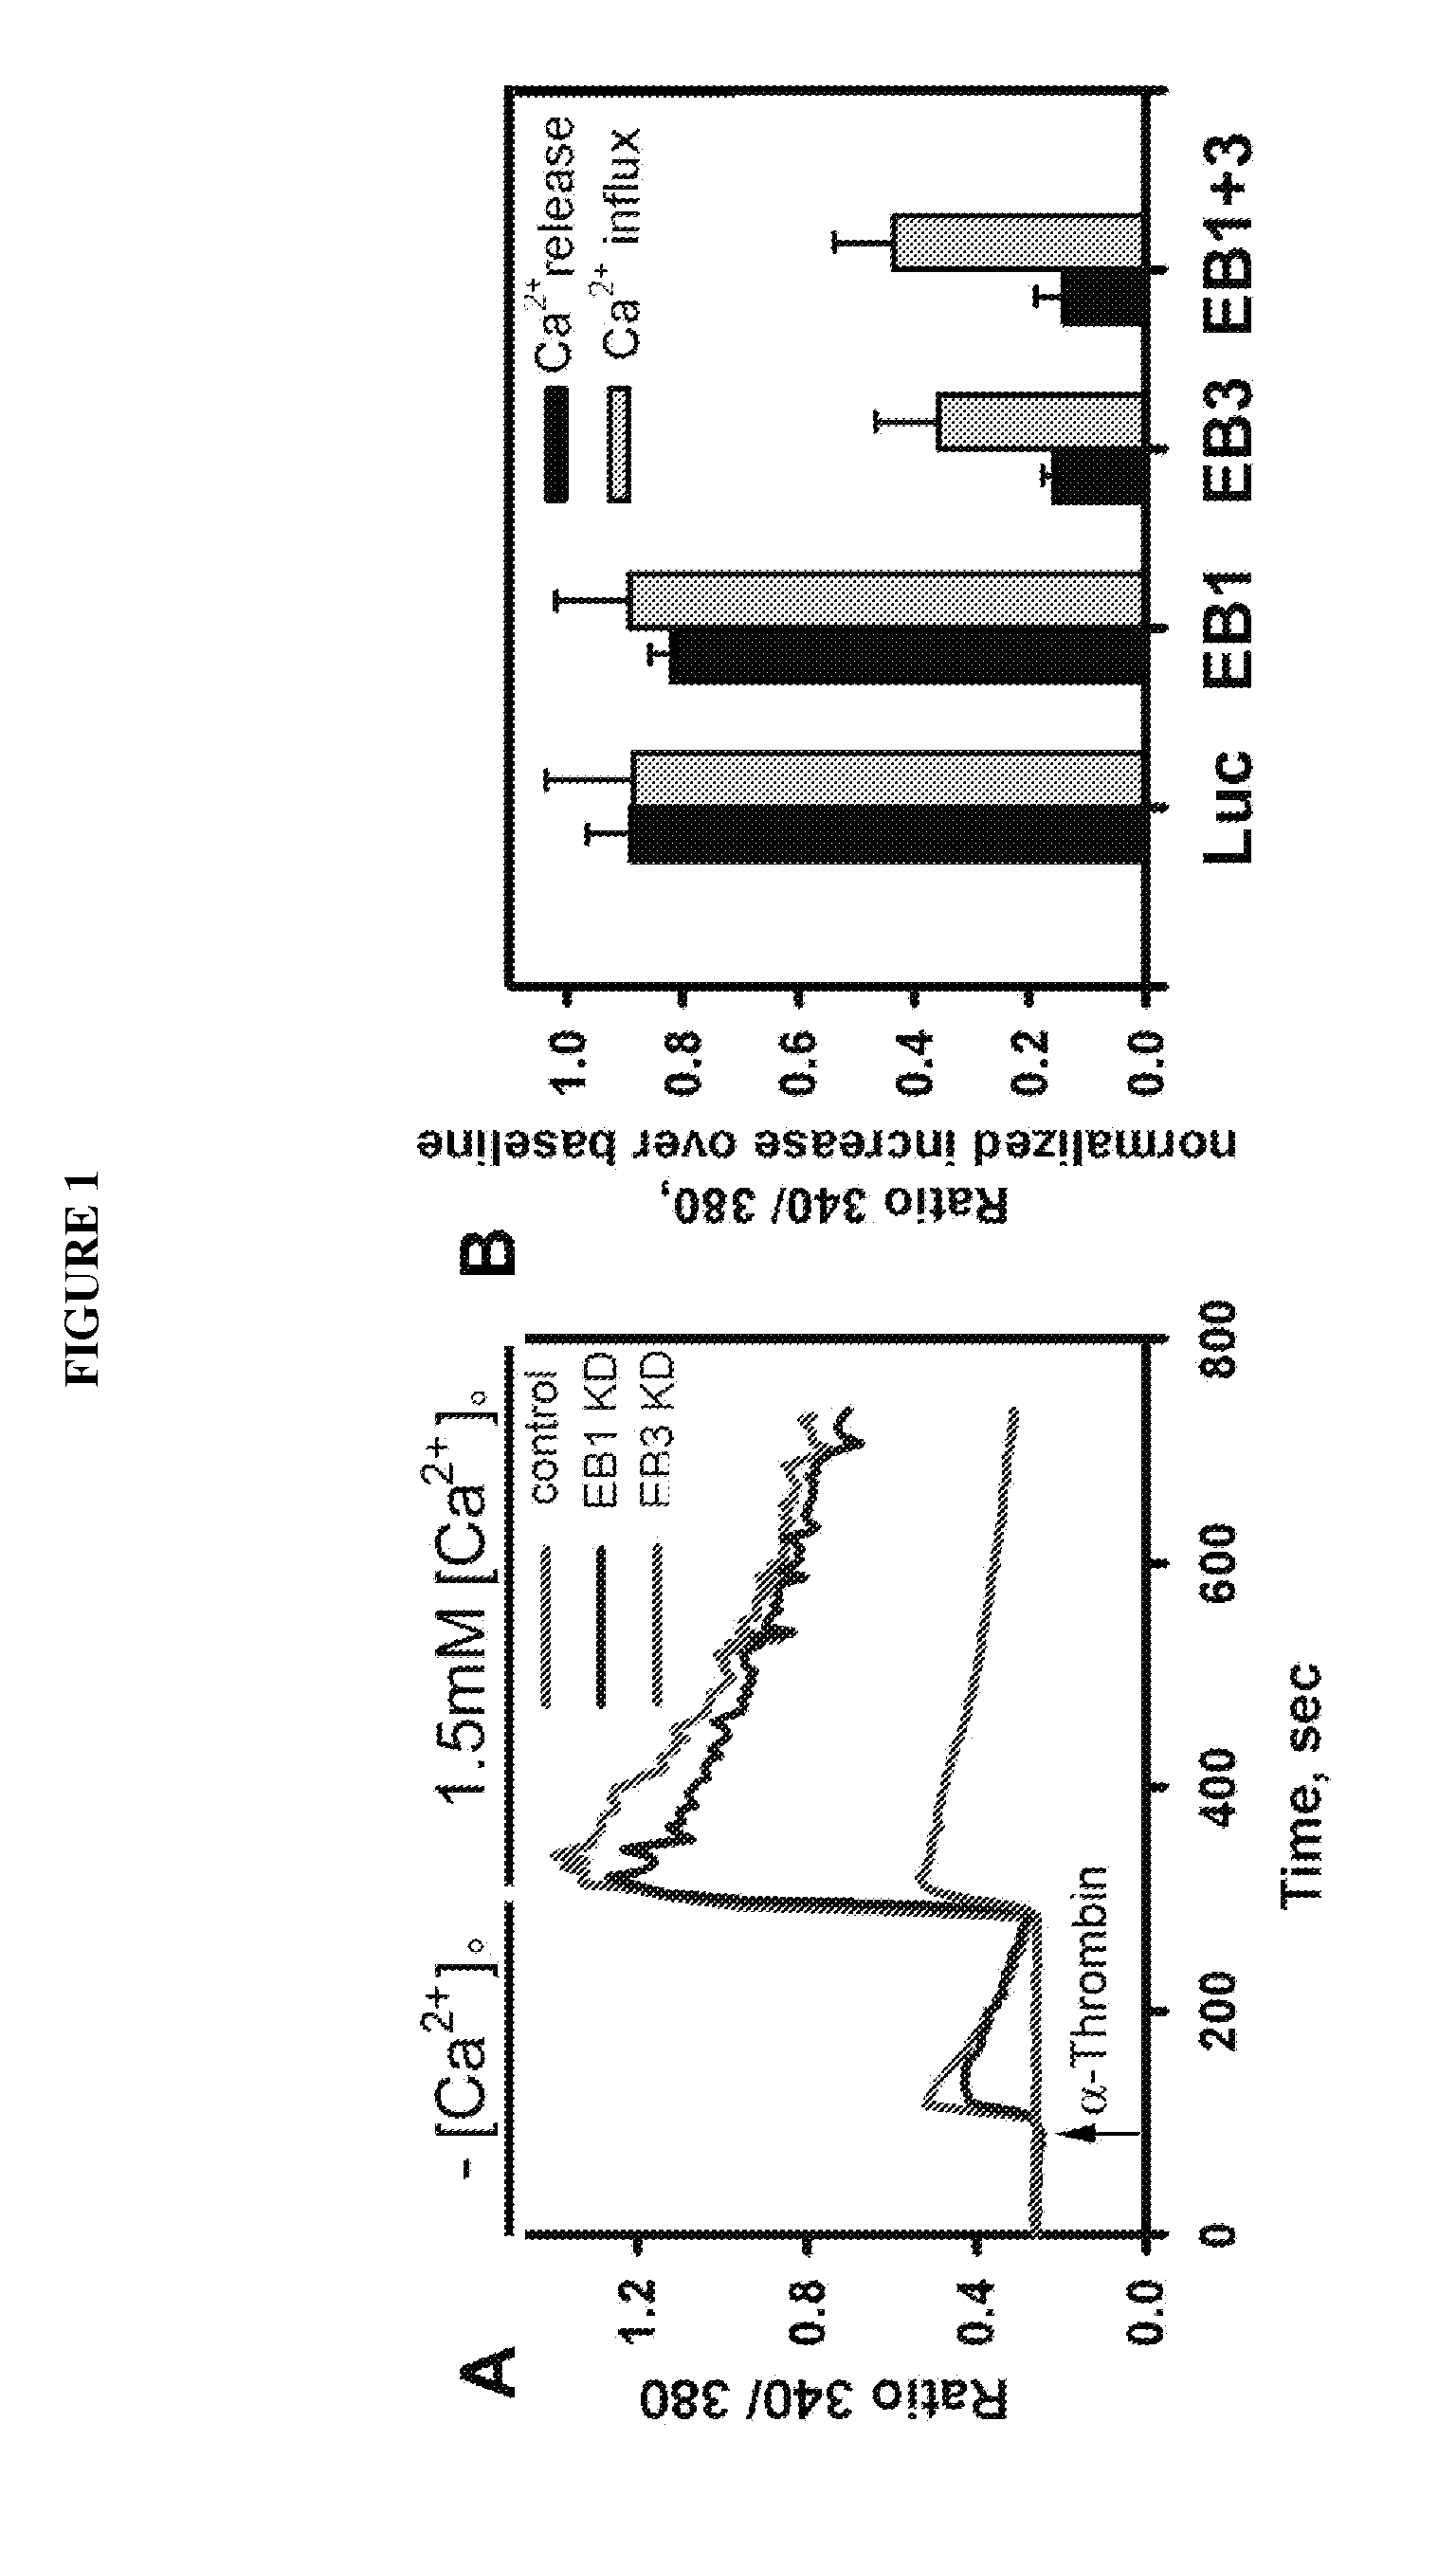 Peptide compositions and methods for treating lung injury, asthma, anaphylaxis, angioedema, systemic vascular permeability syndromes, and nasal congestion